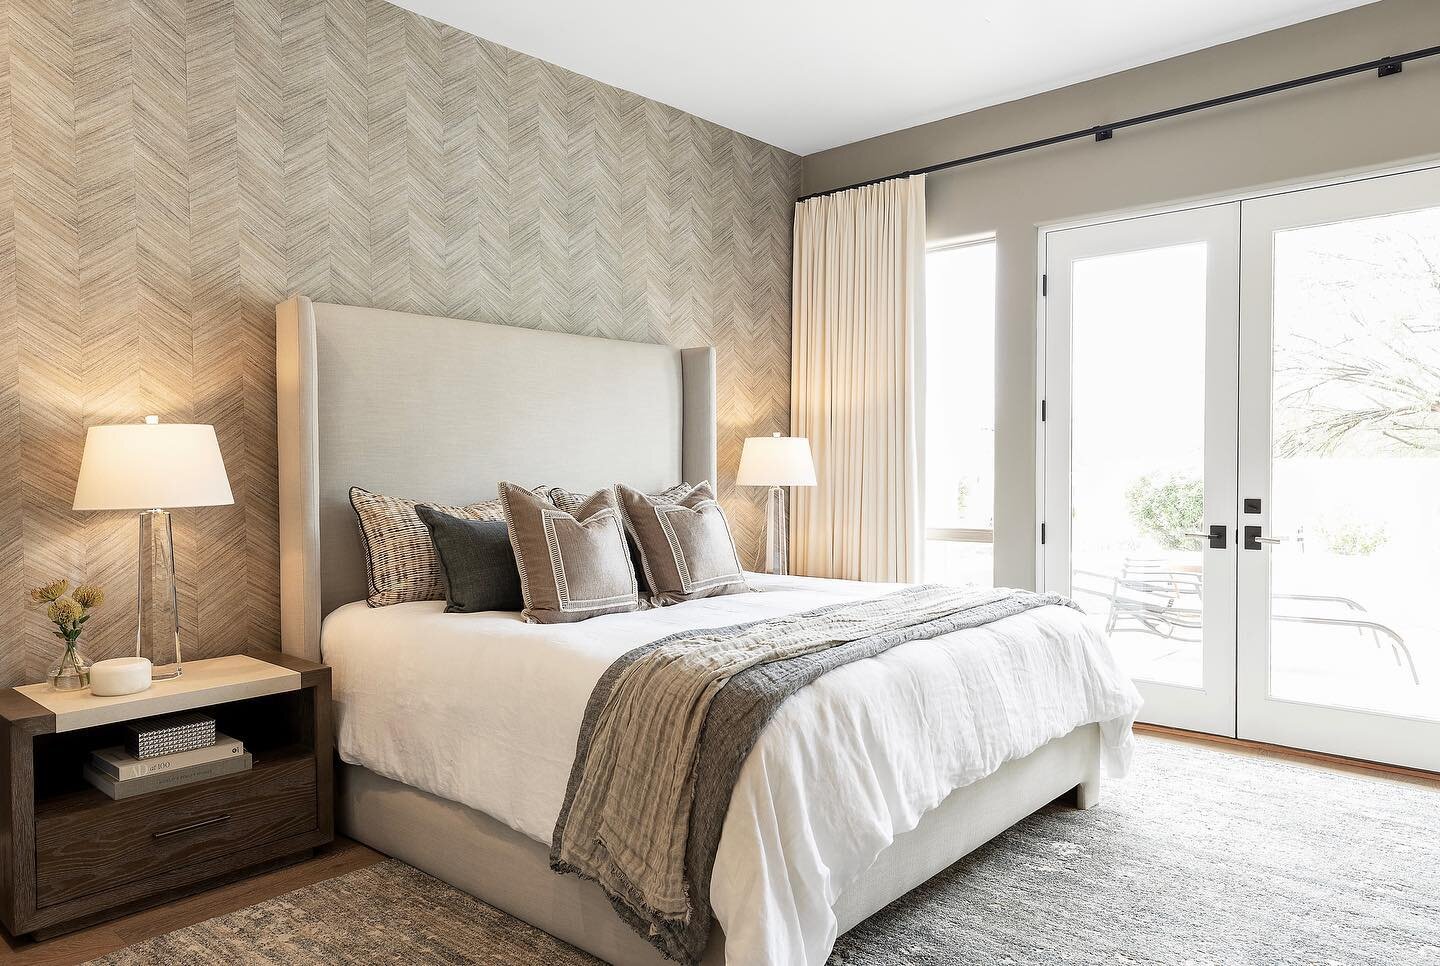 We&rsquo;re excited to share this client&rsquo;s master bedroom! Attention to detail was key in making this neutral bedroom the sophisticated, yet relaxed, retreat it is. We could not be happier with the way it all came together! 
.
What do you think